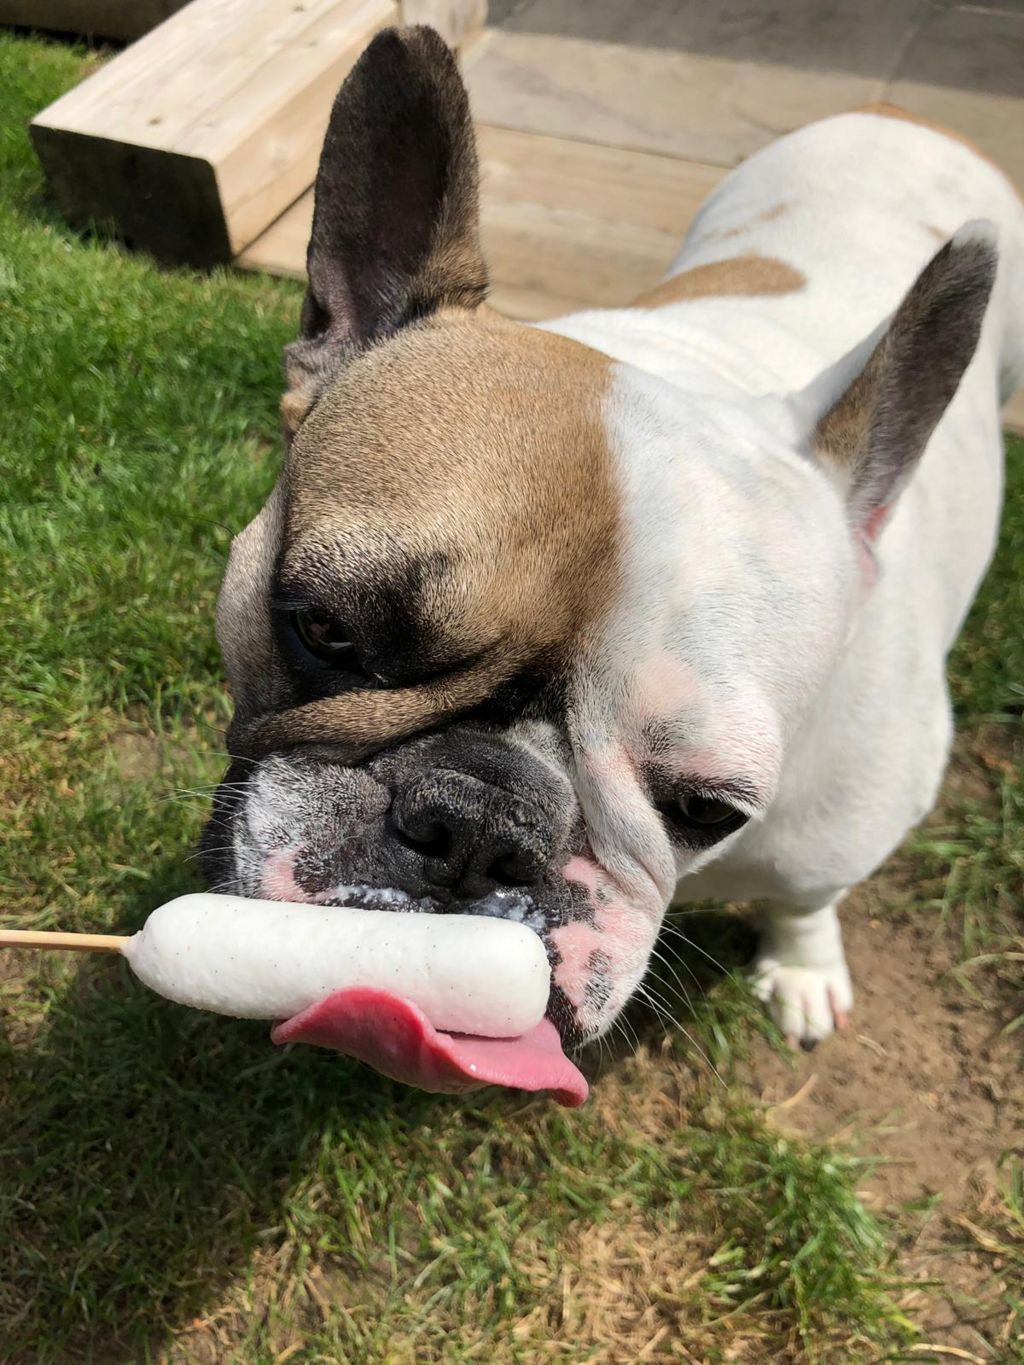 A dog eating an ice lolly